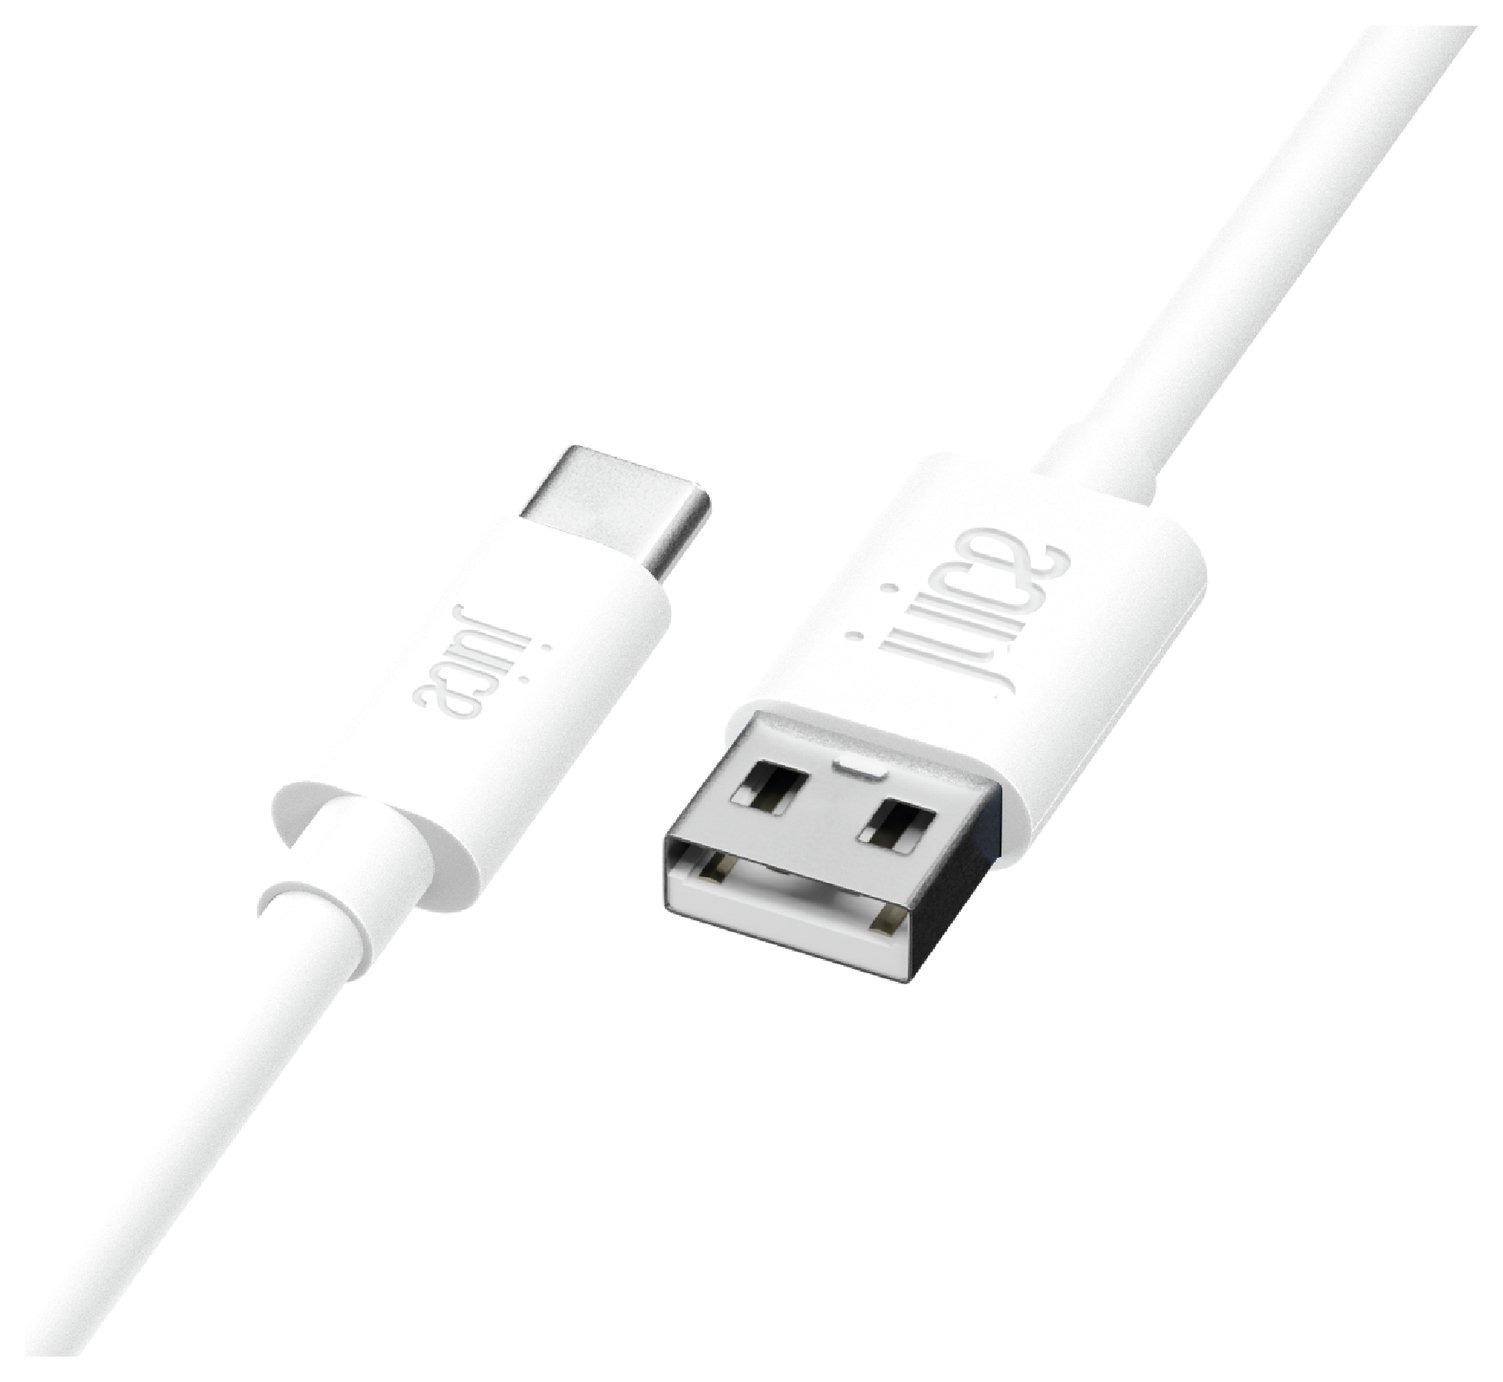 Juice USB A to USB C 1m Charge Cable Review